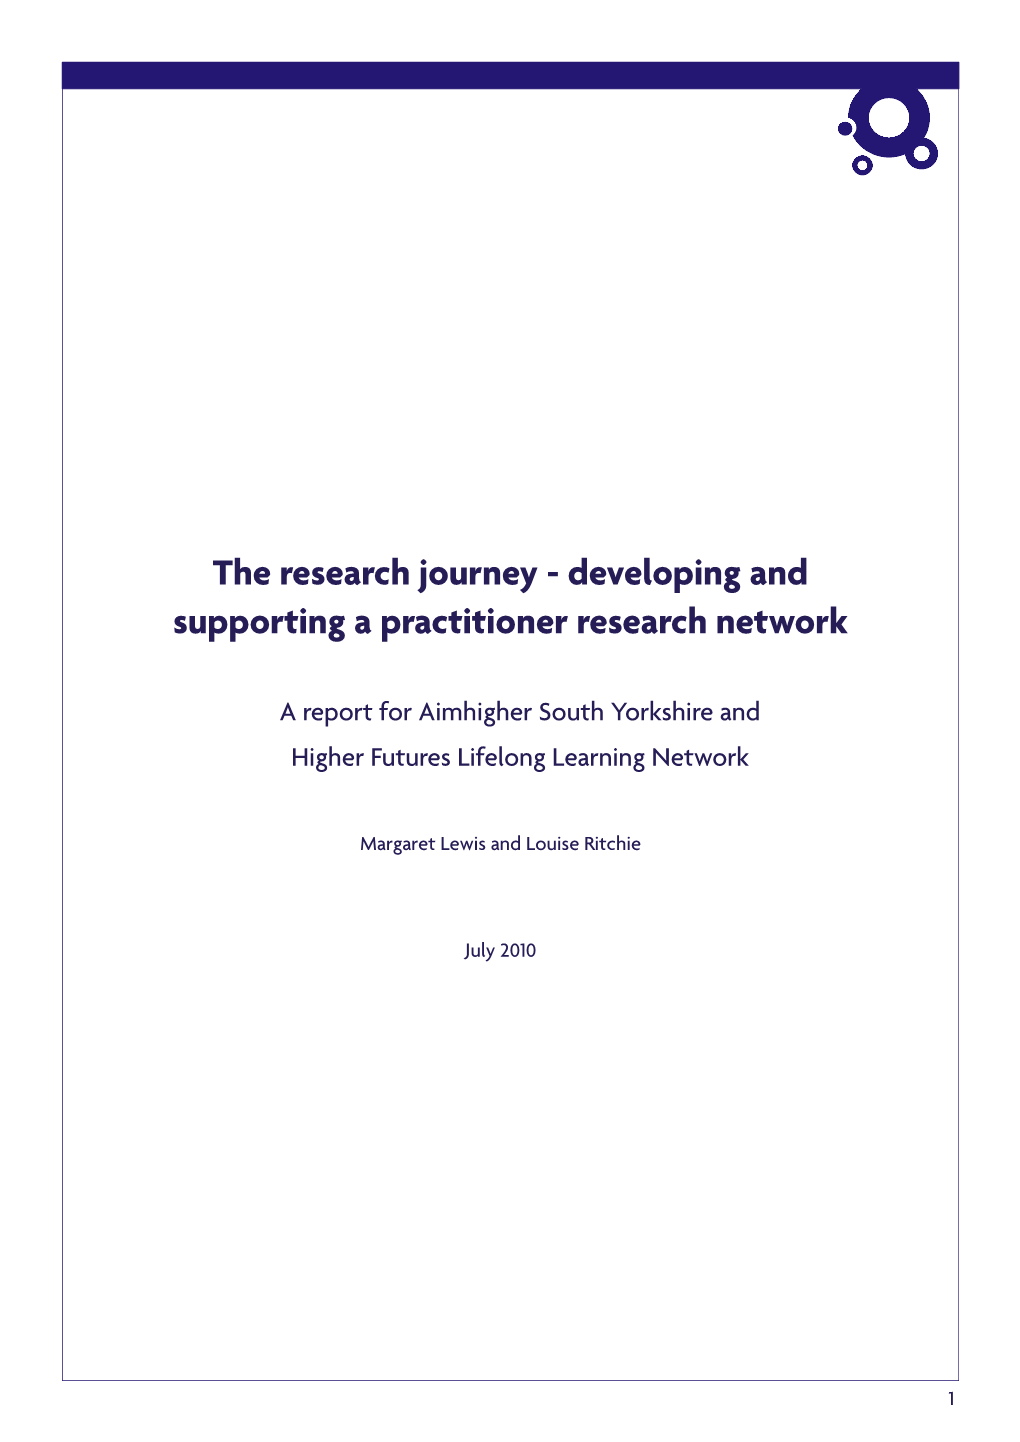 Developing and Supporting a Practitioner Research Network